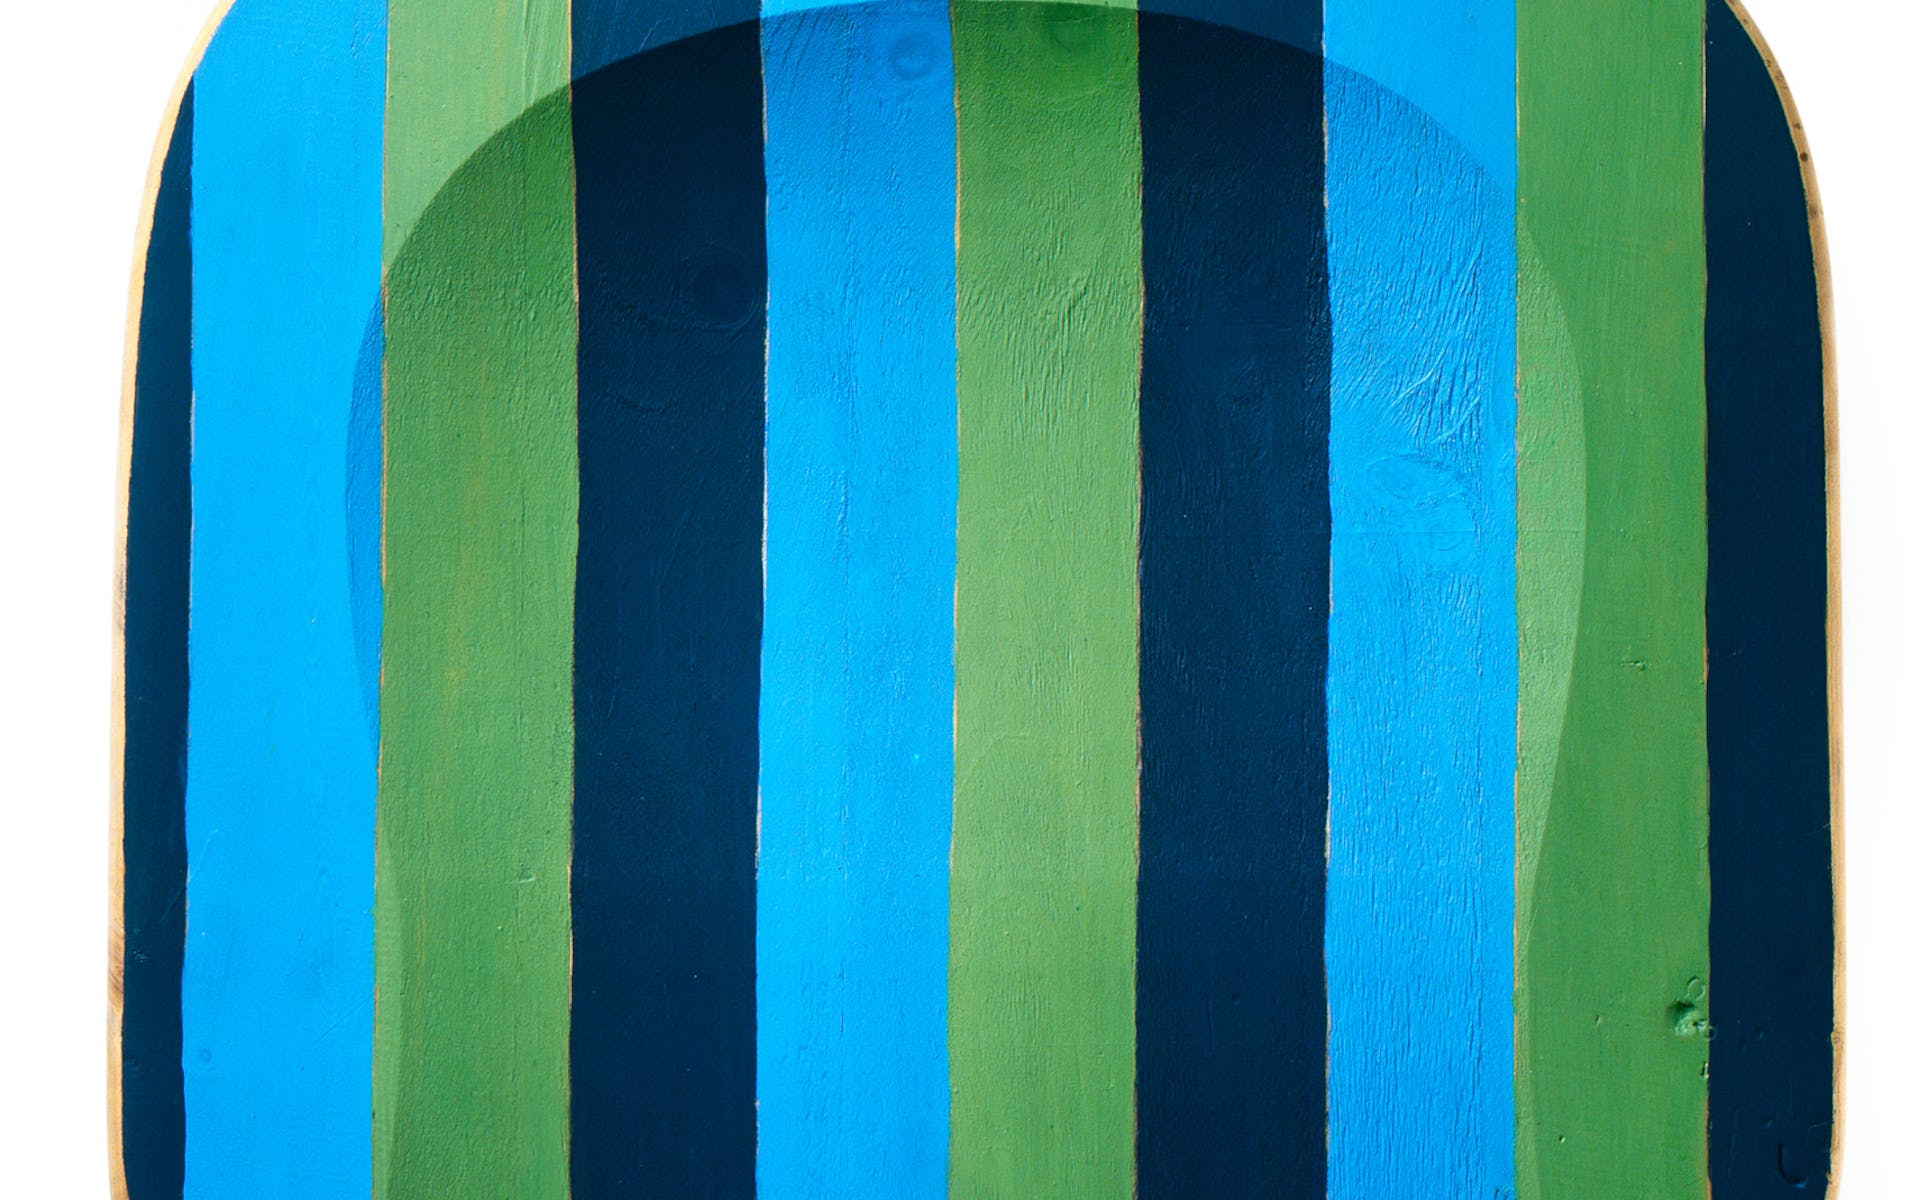 Sherrie Levine, Chair Seat: 7, 1986